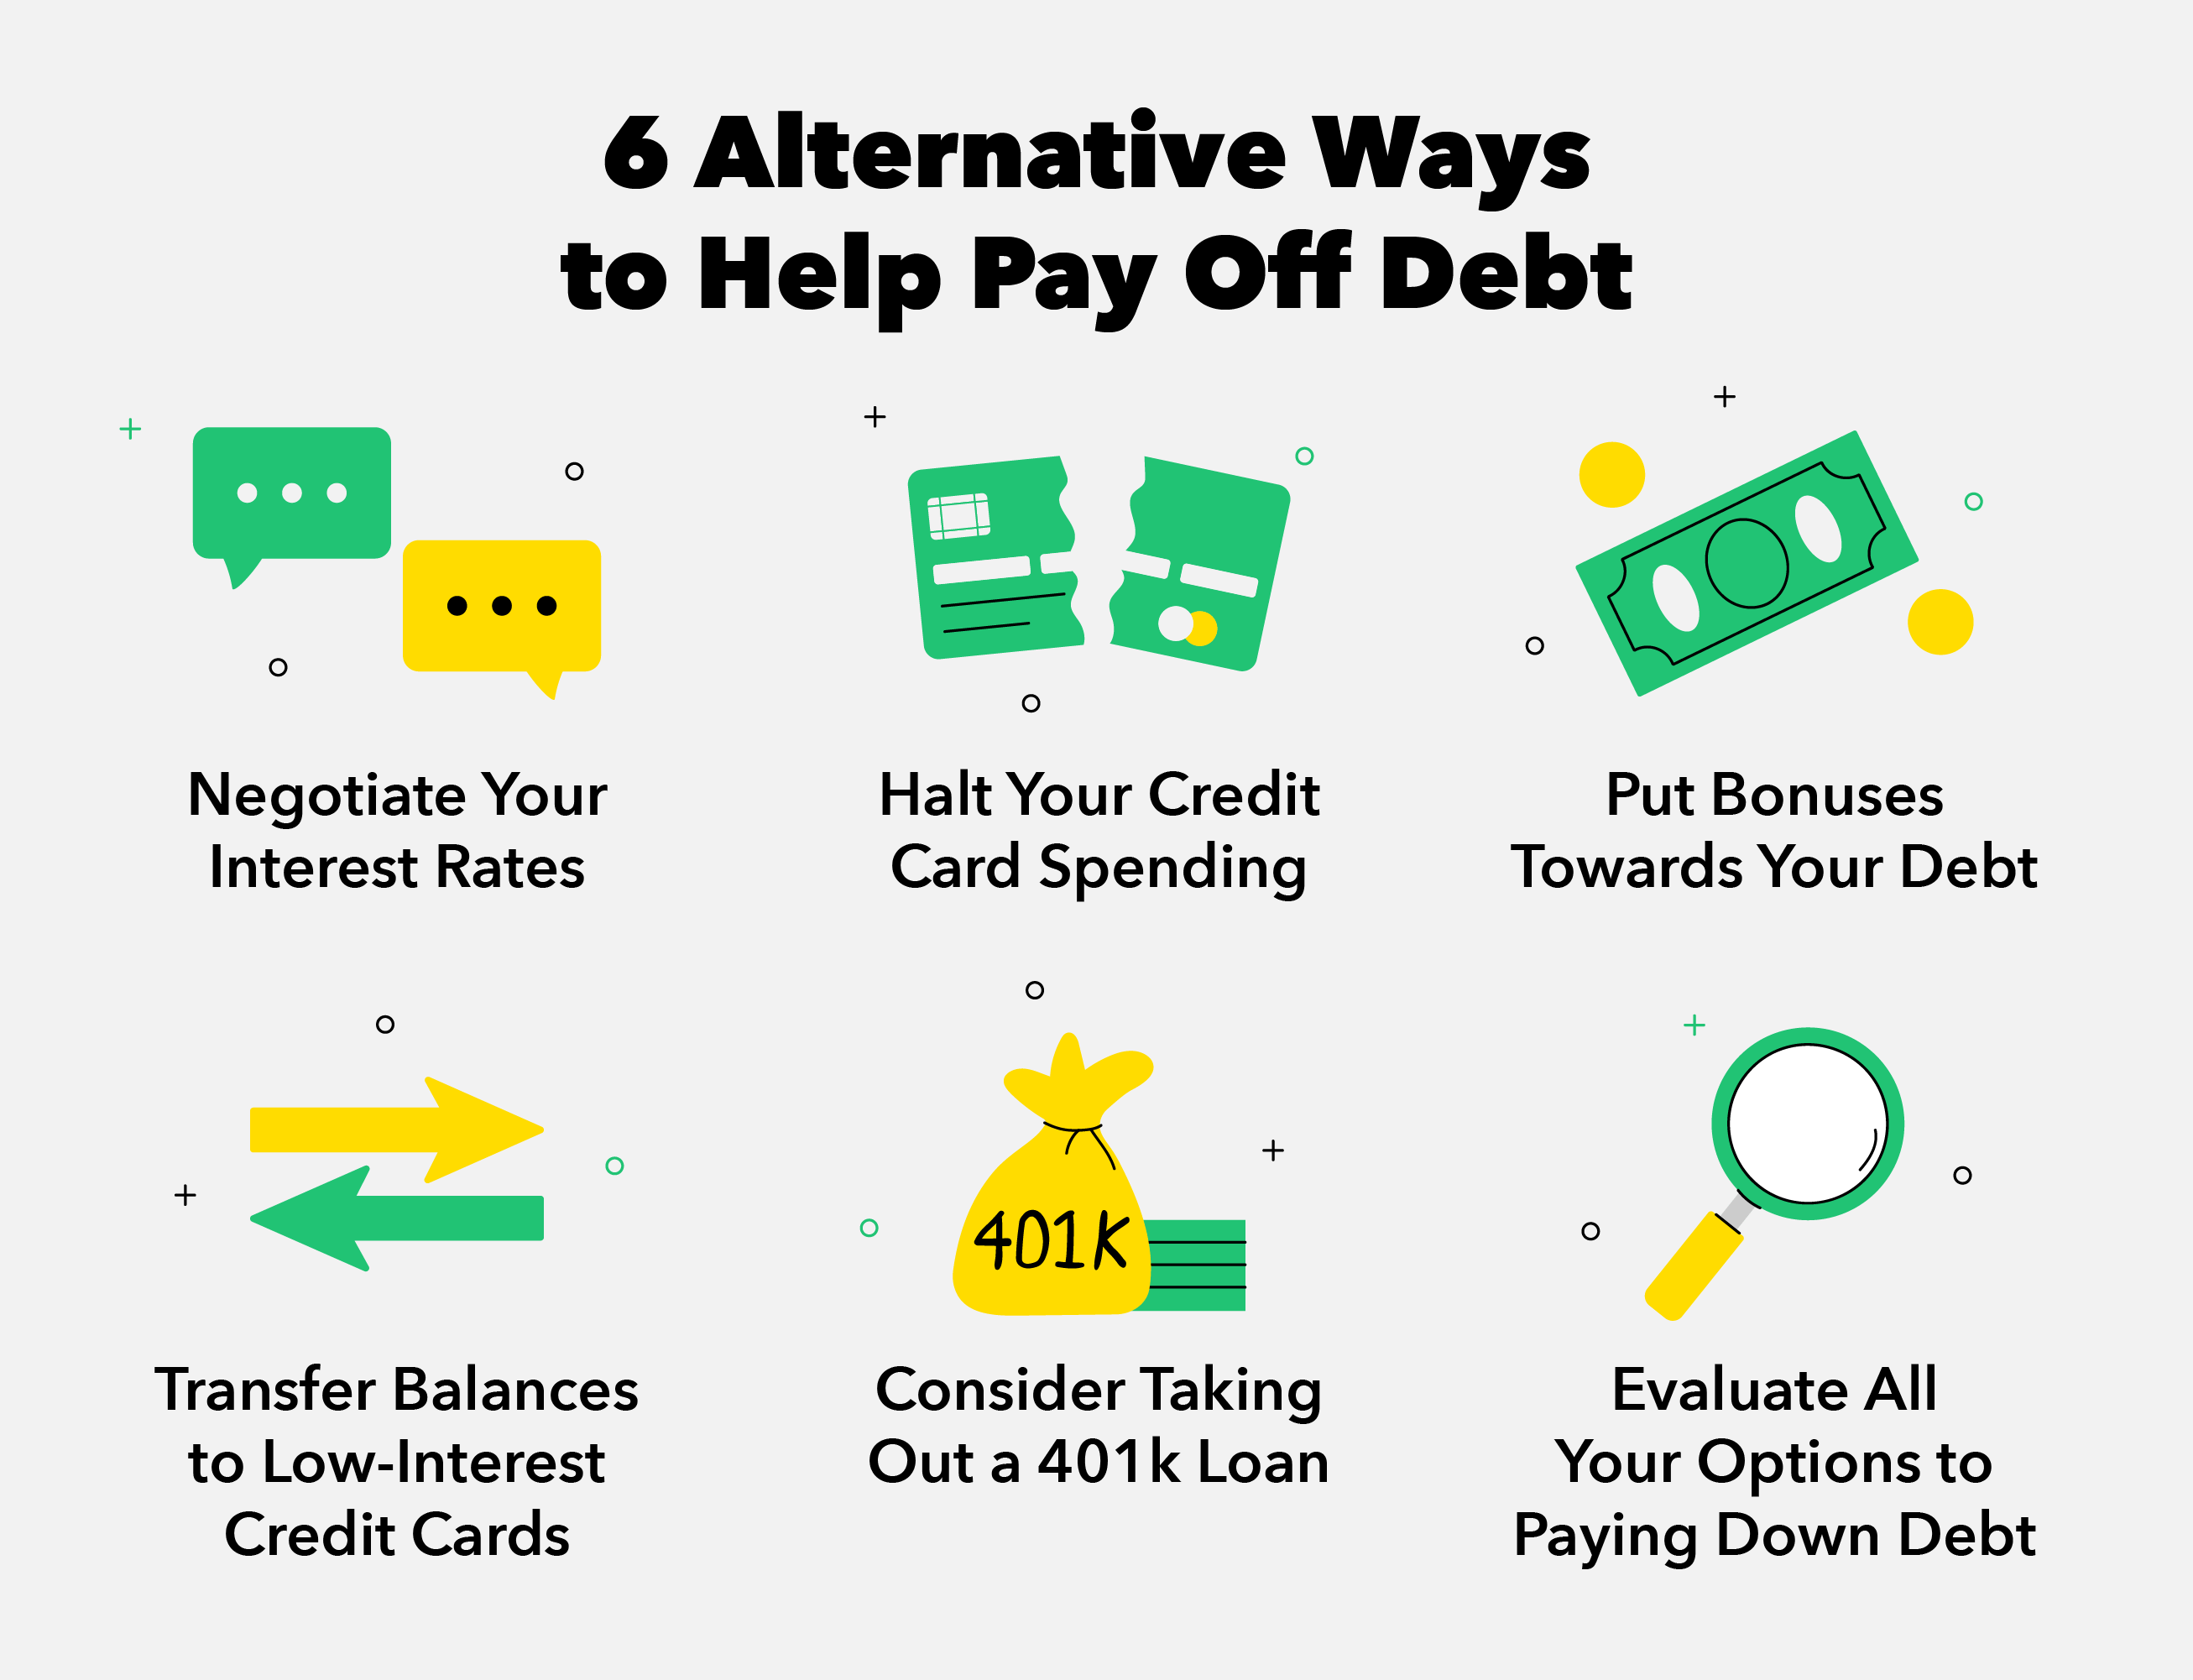 6 Ways to Pay Off Debt Without Cashing Out Your 401k